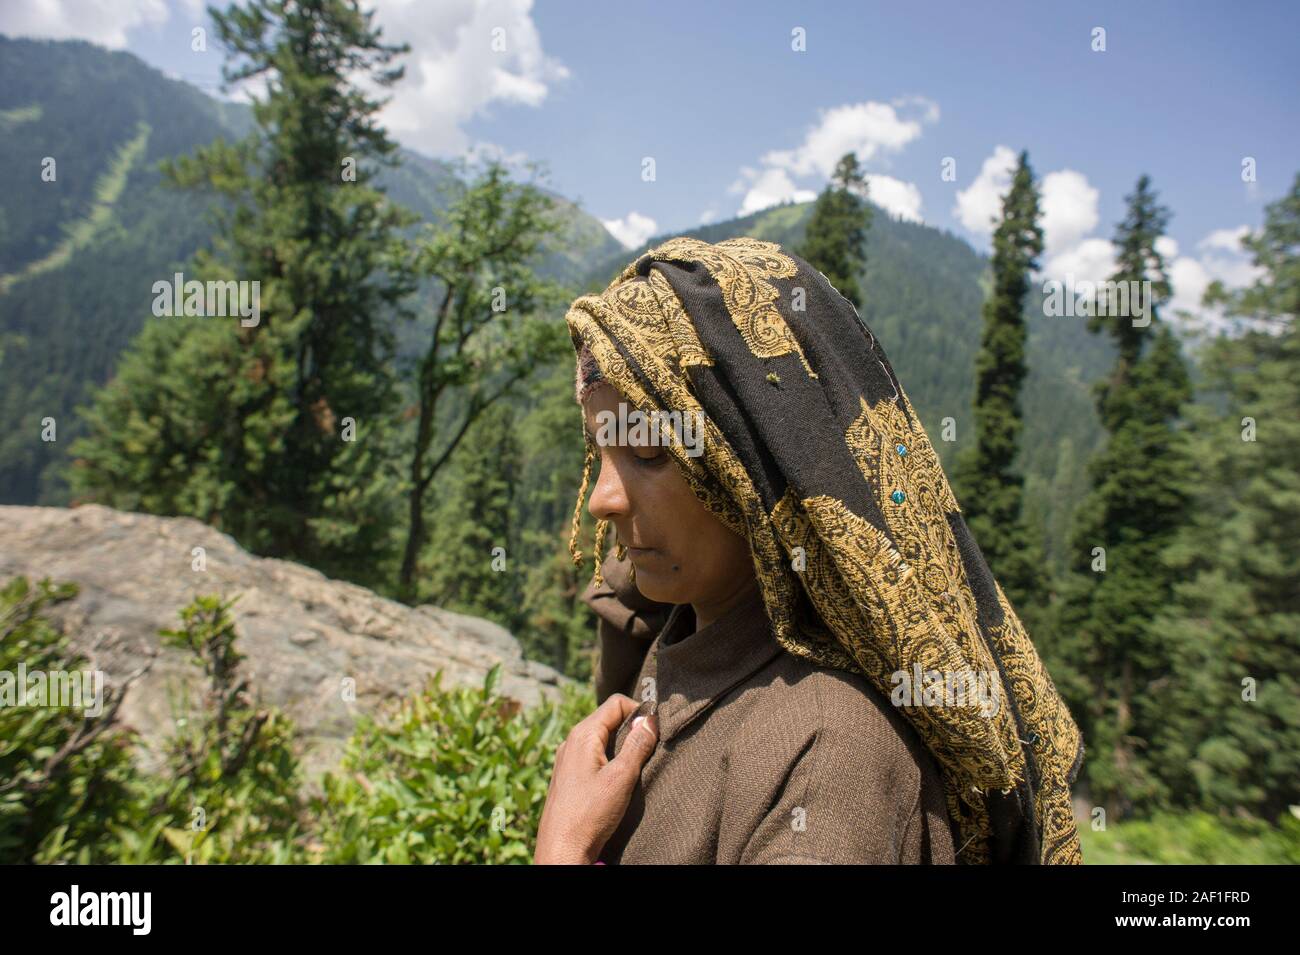 Pahalgam, Jammu and Kashmir, India - August 02, 2011: Profile portrait of gypsy woman of Gujjar ethnicity with eyes closed and hand on chest Stock Photo